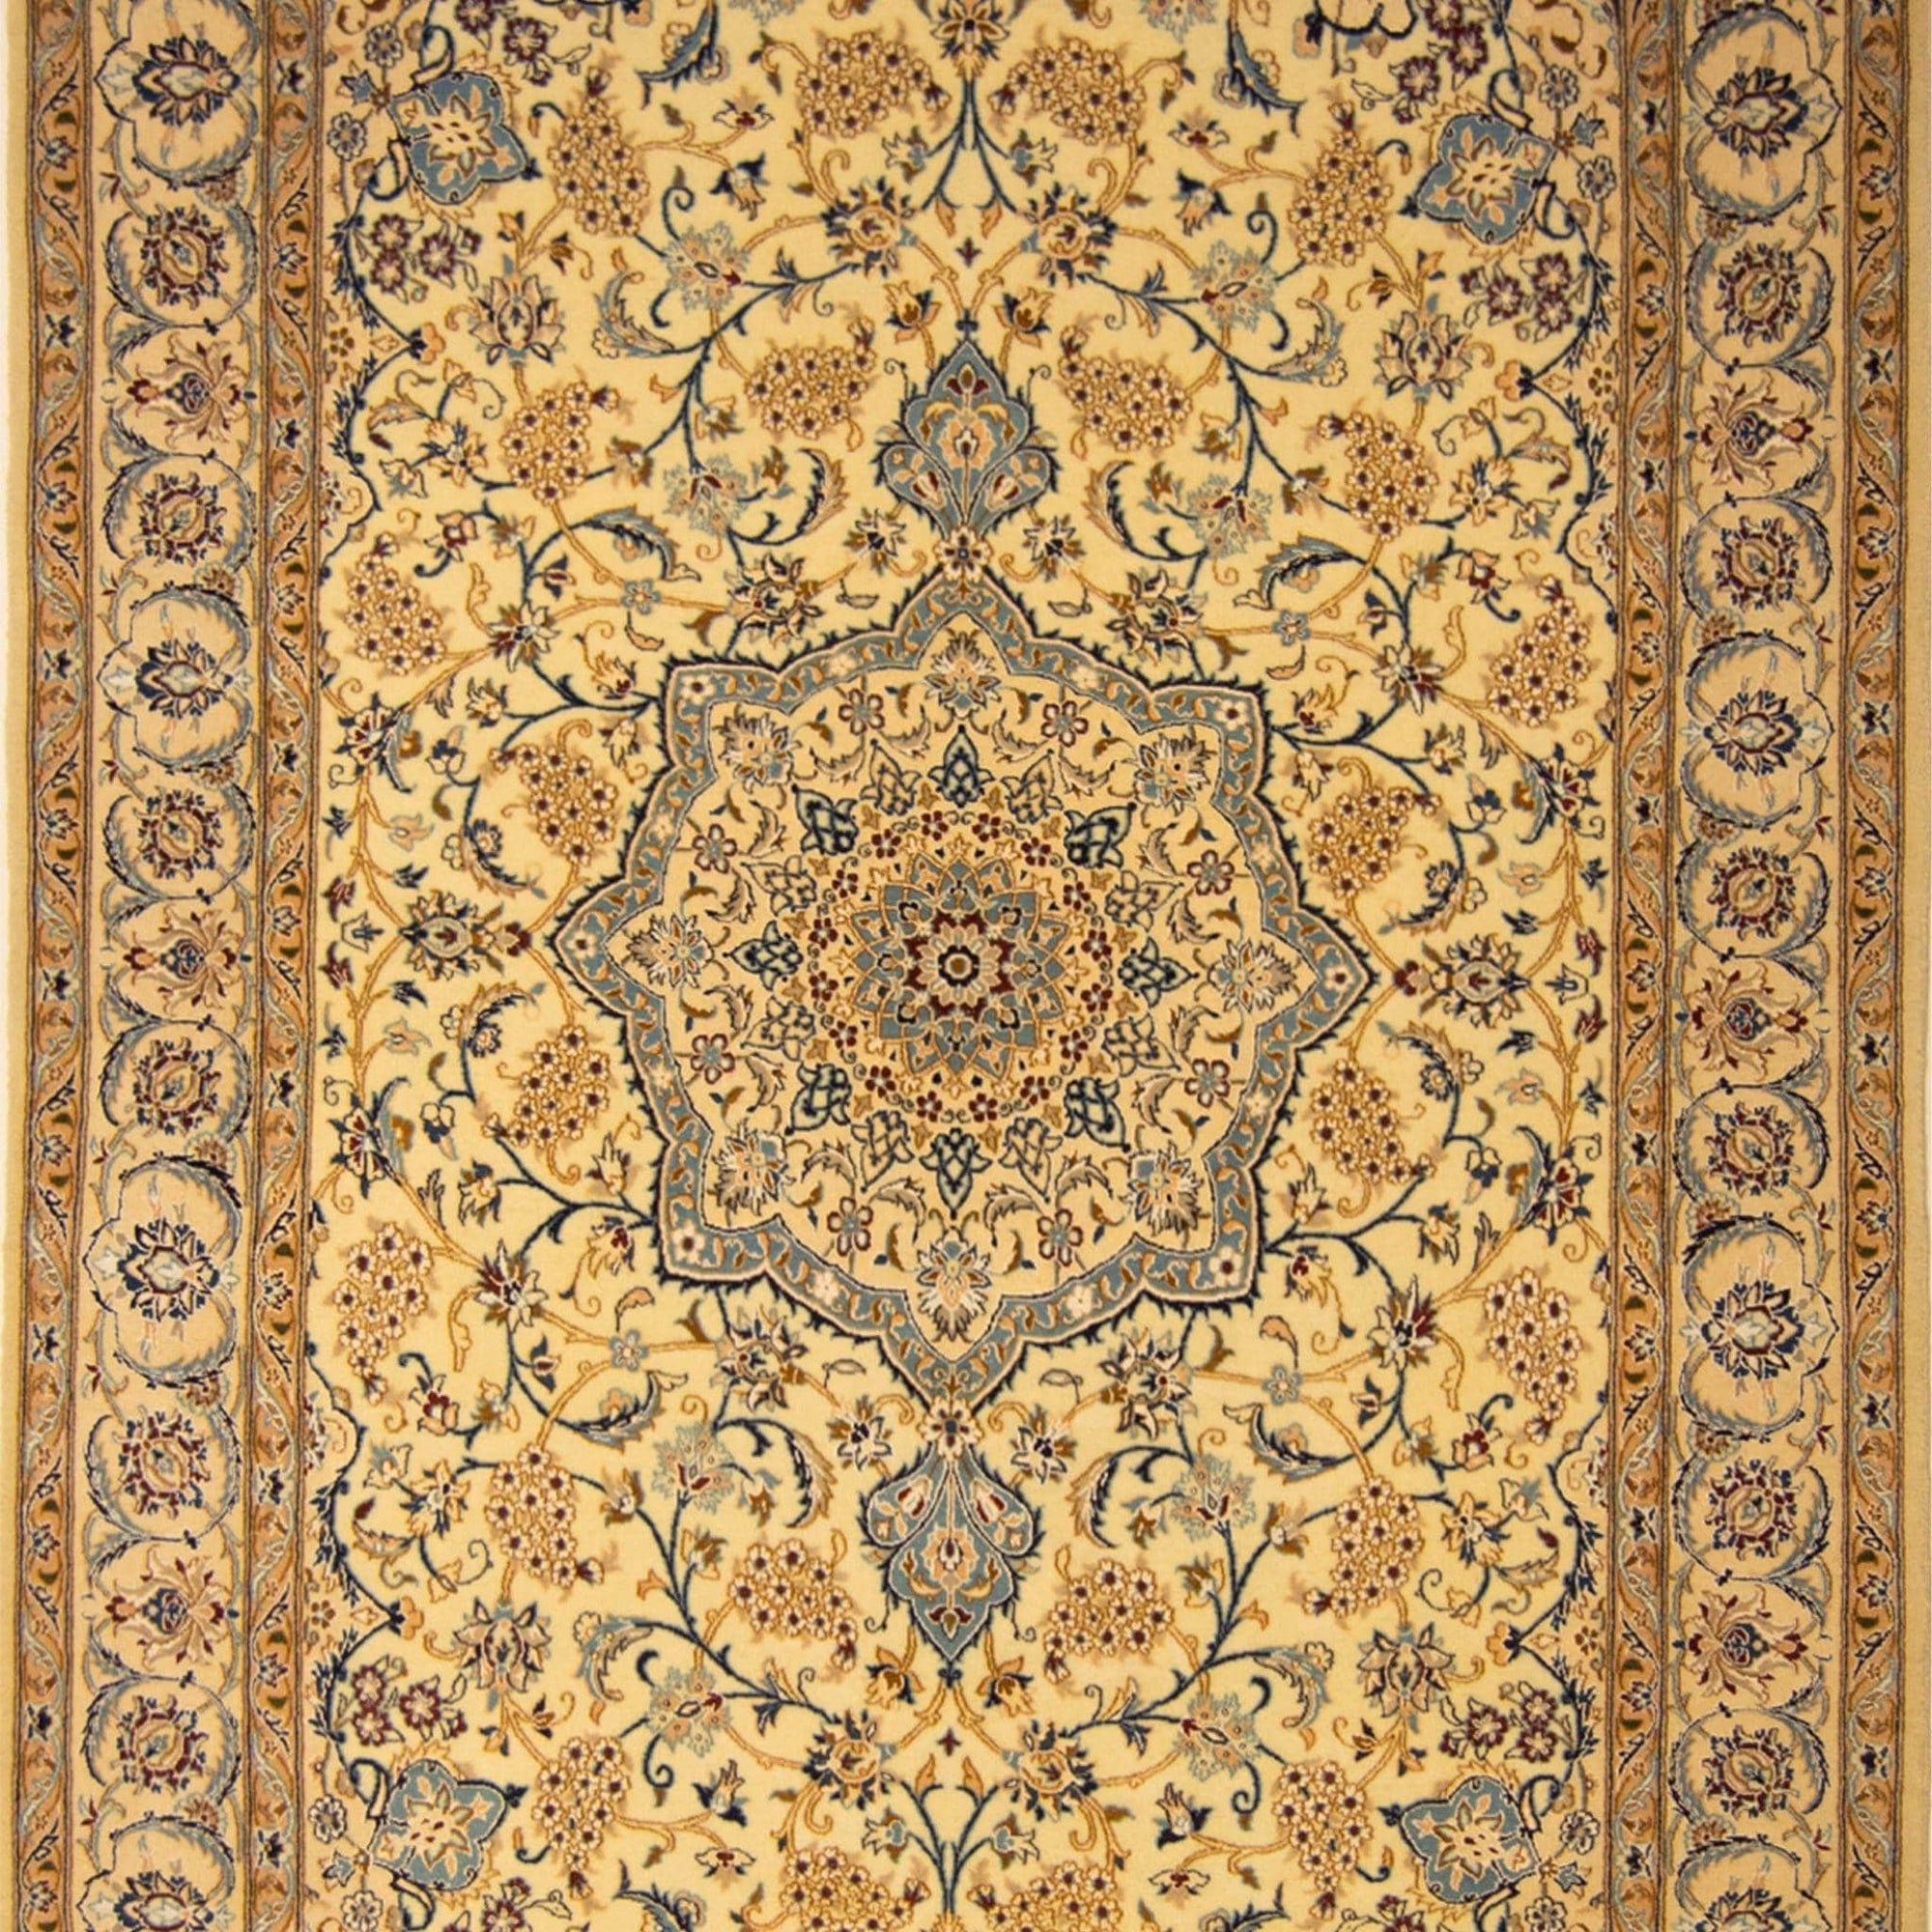 Super Fine Hand-knotted 3LAA Nain Persian Wool & Silk Rug ( SIGNED HABIBIAN )137cm x 235cm